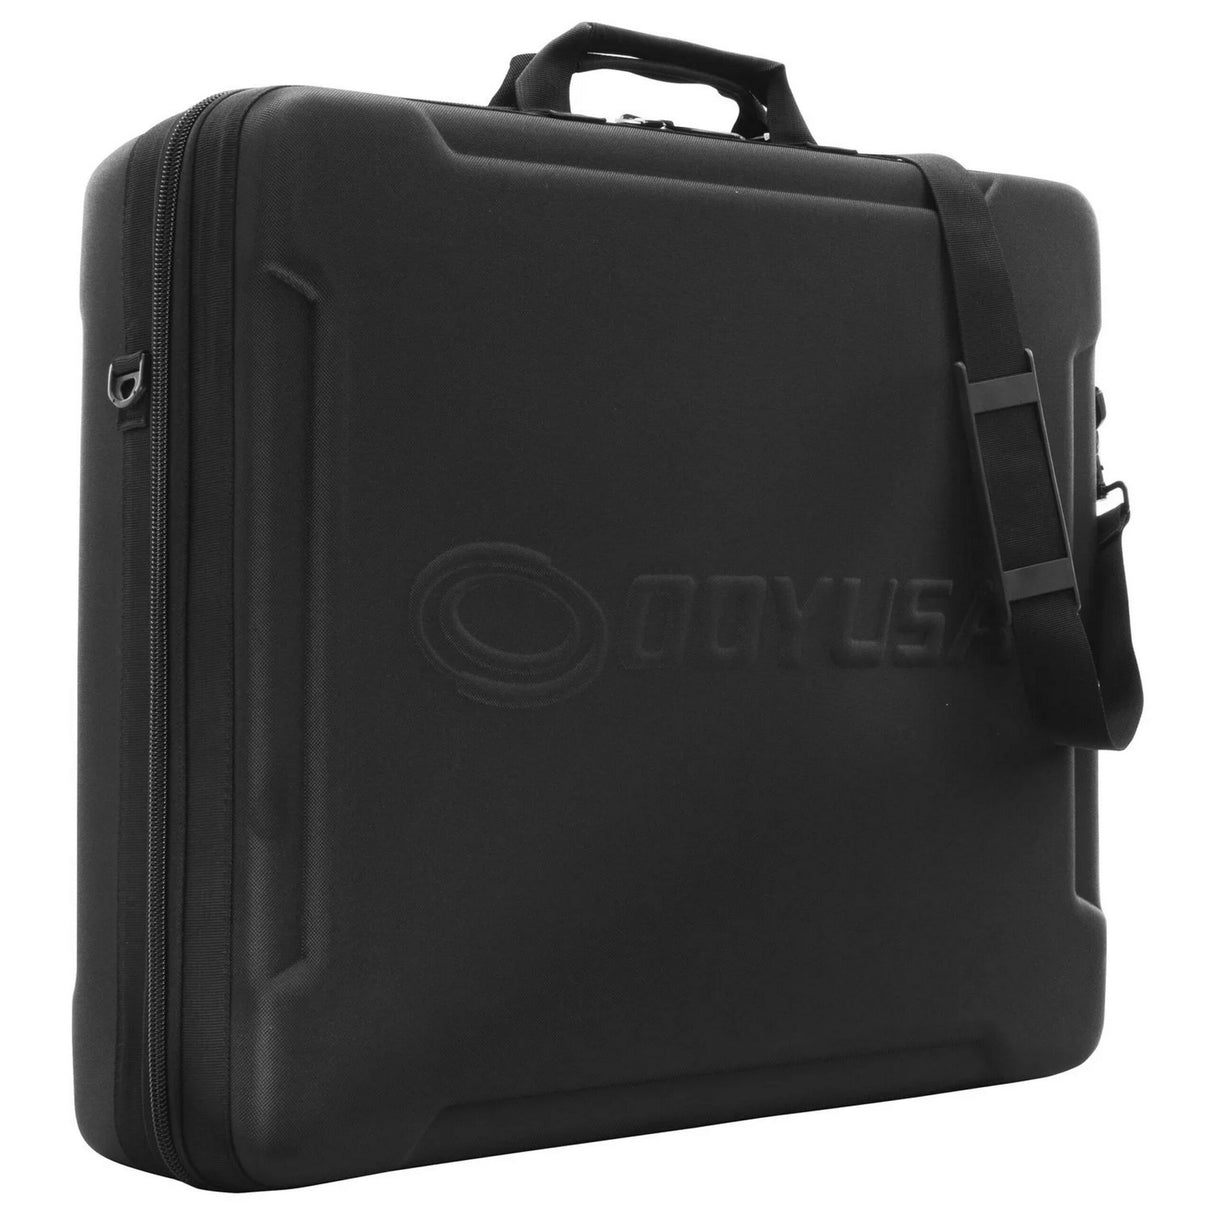 Odyssey BMMV10TOUR EVA Case for Pioneer DJM-V10 with Cable Compartment